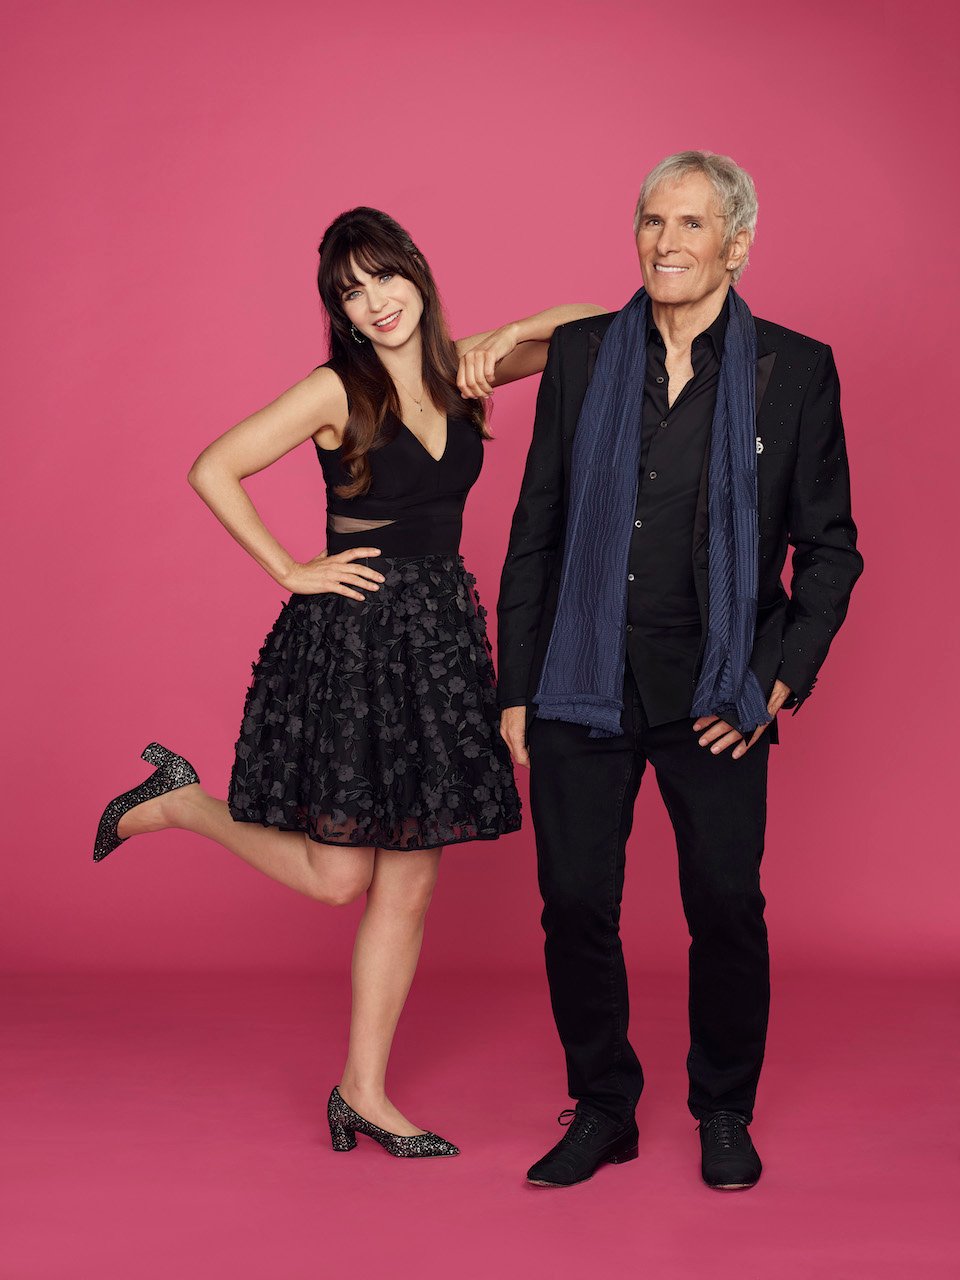 ABC's 'Celebrity Dating Game' stars Zooey Deschanel and Michael Bolton